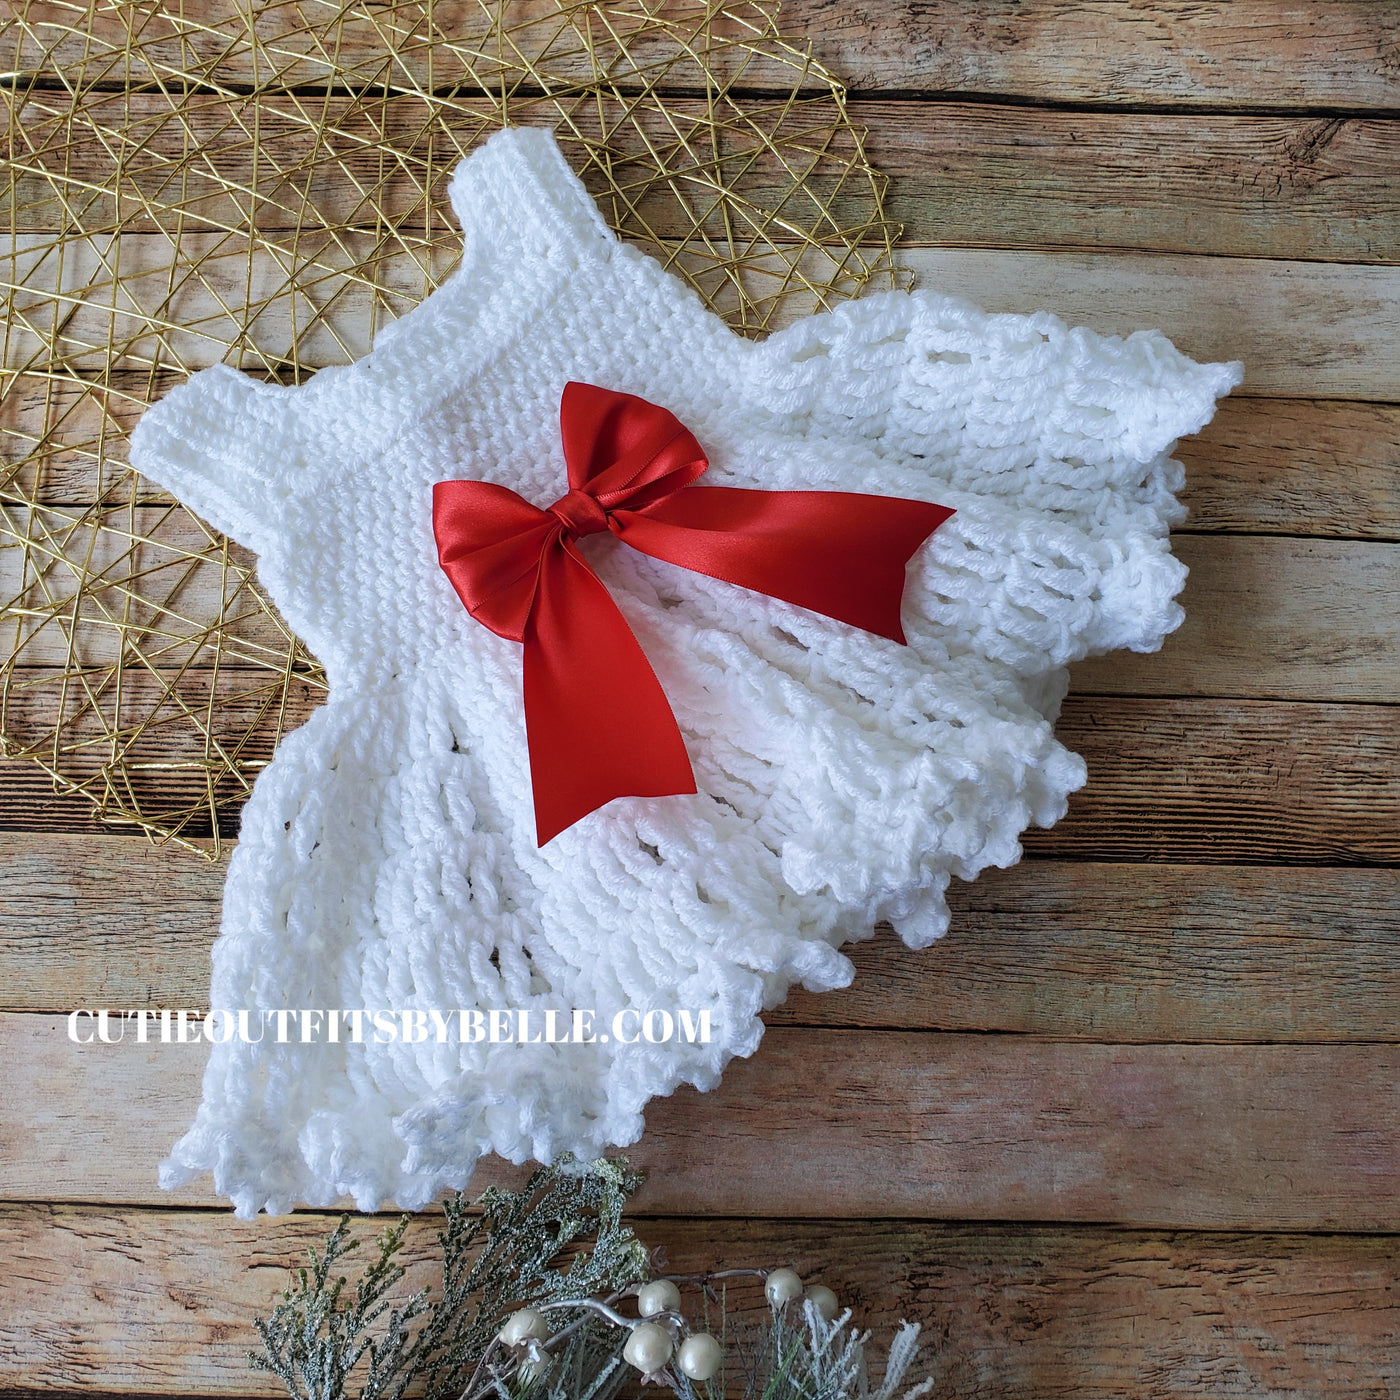 Crochet baby dress with red bow